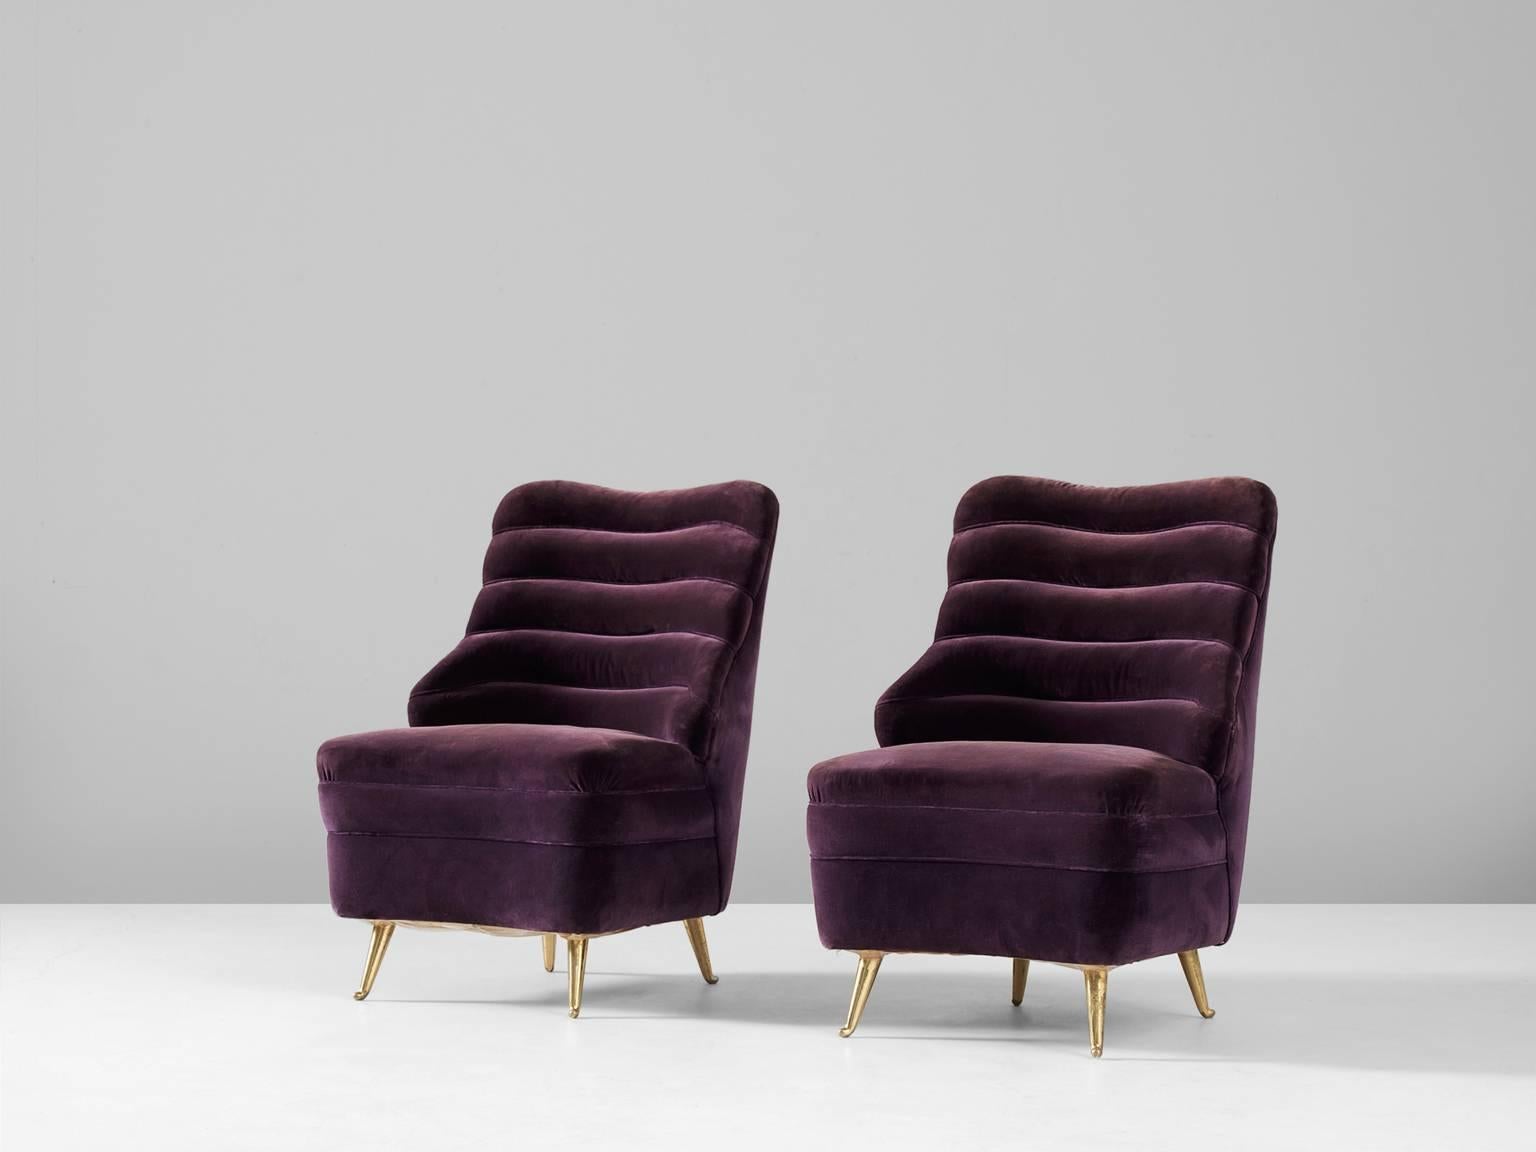 Pair of lounge chairs, in velvet and metal, by Andrea Busiri Vici, Italy, 1960s.

Elegant pair of lounge chairs in purple velvet. Organic shaped seating and back. The back of the easy chairs is layered and reminds of natural phenomenon like a sea